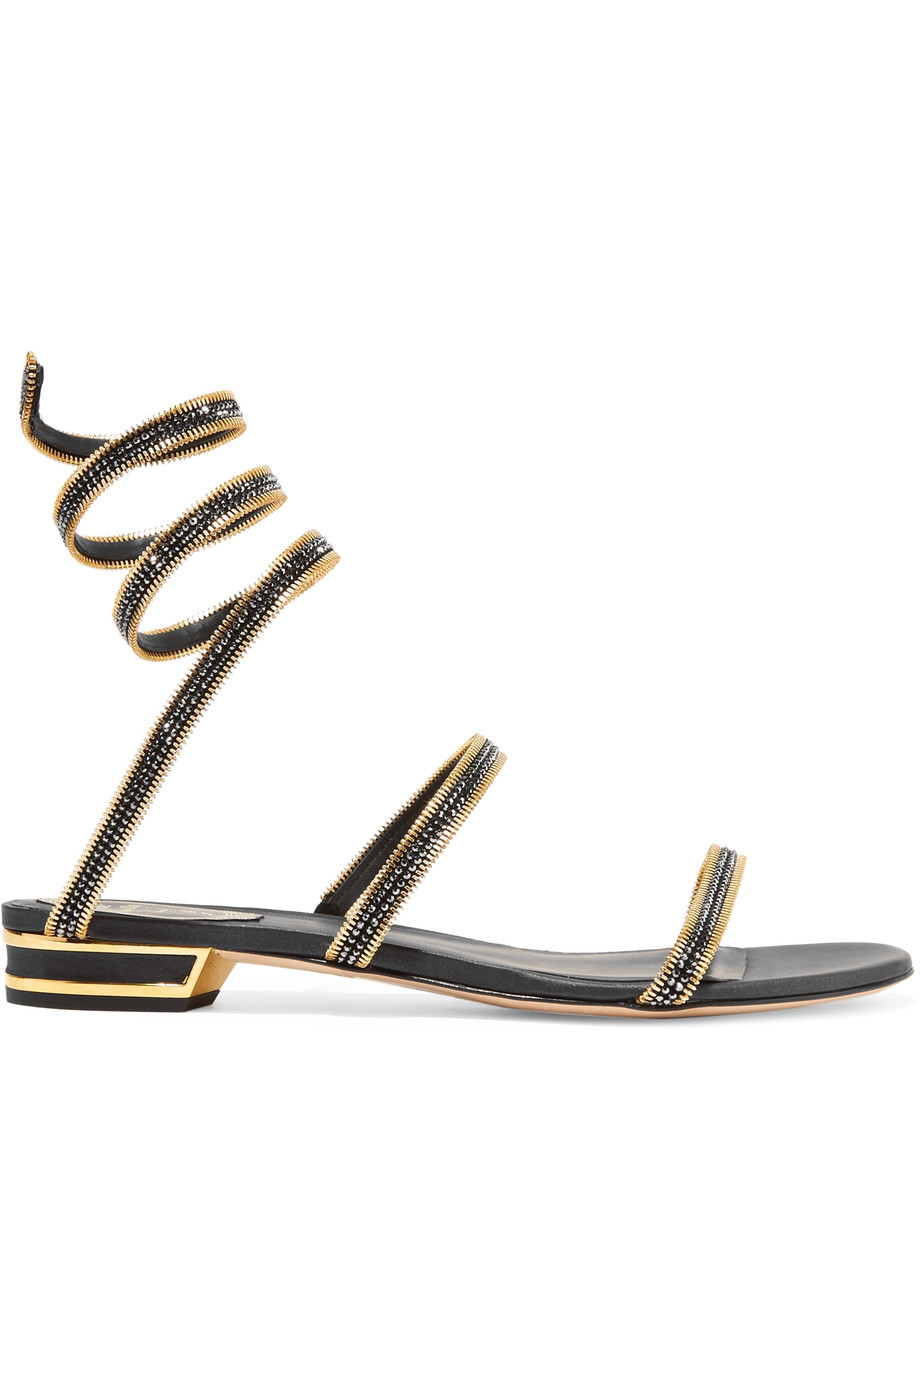 RenÉ Caovilla Gold Hardware And Sequin-embellished Leather Sandals ...